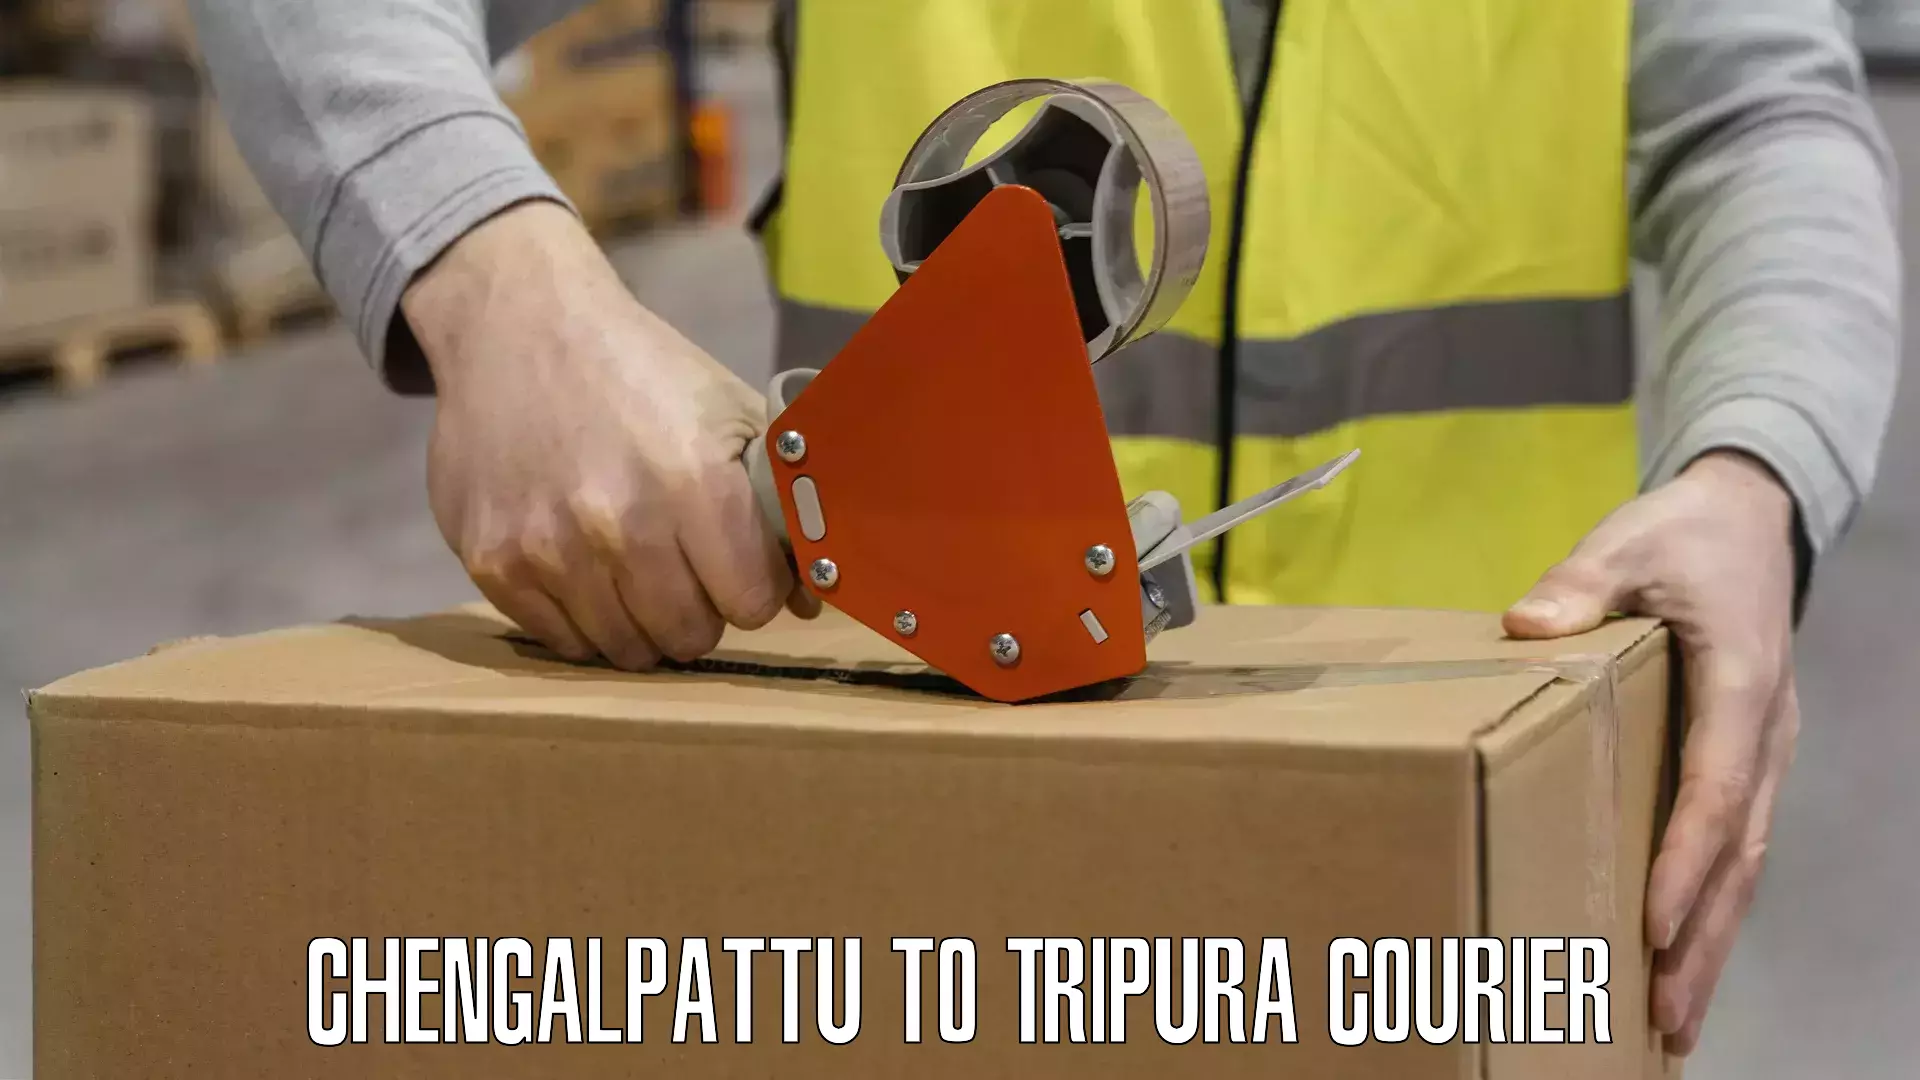 Easy access courier services in Chengalpattu to Tripura